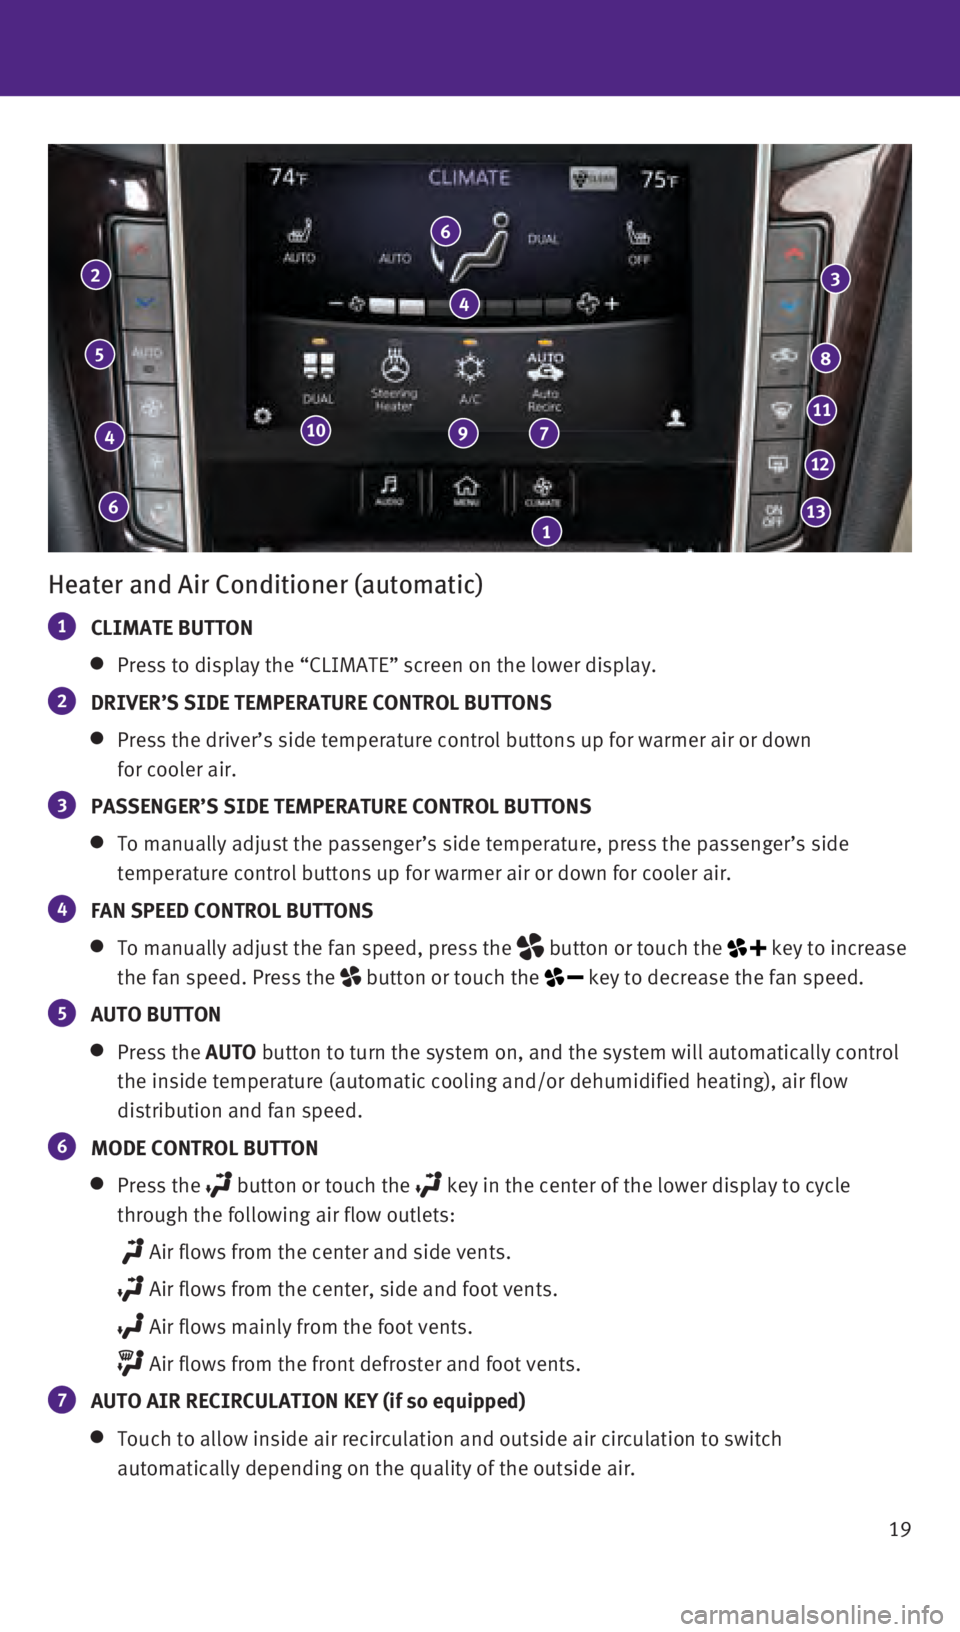 INFINITI Q50 2016  Quick Reference Guide 19
Heater and Air Conditioner (automatic)
1 CLIMATE BUTTON
   Press to display the “CLIMATE” screen on the lower display.
2 DRIVER’S SIDE TEMPERATURE CONTROL BUTTONS
     Press the driver’s si